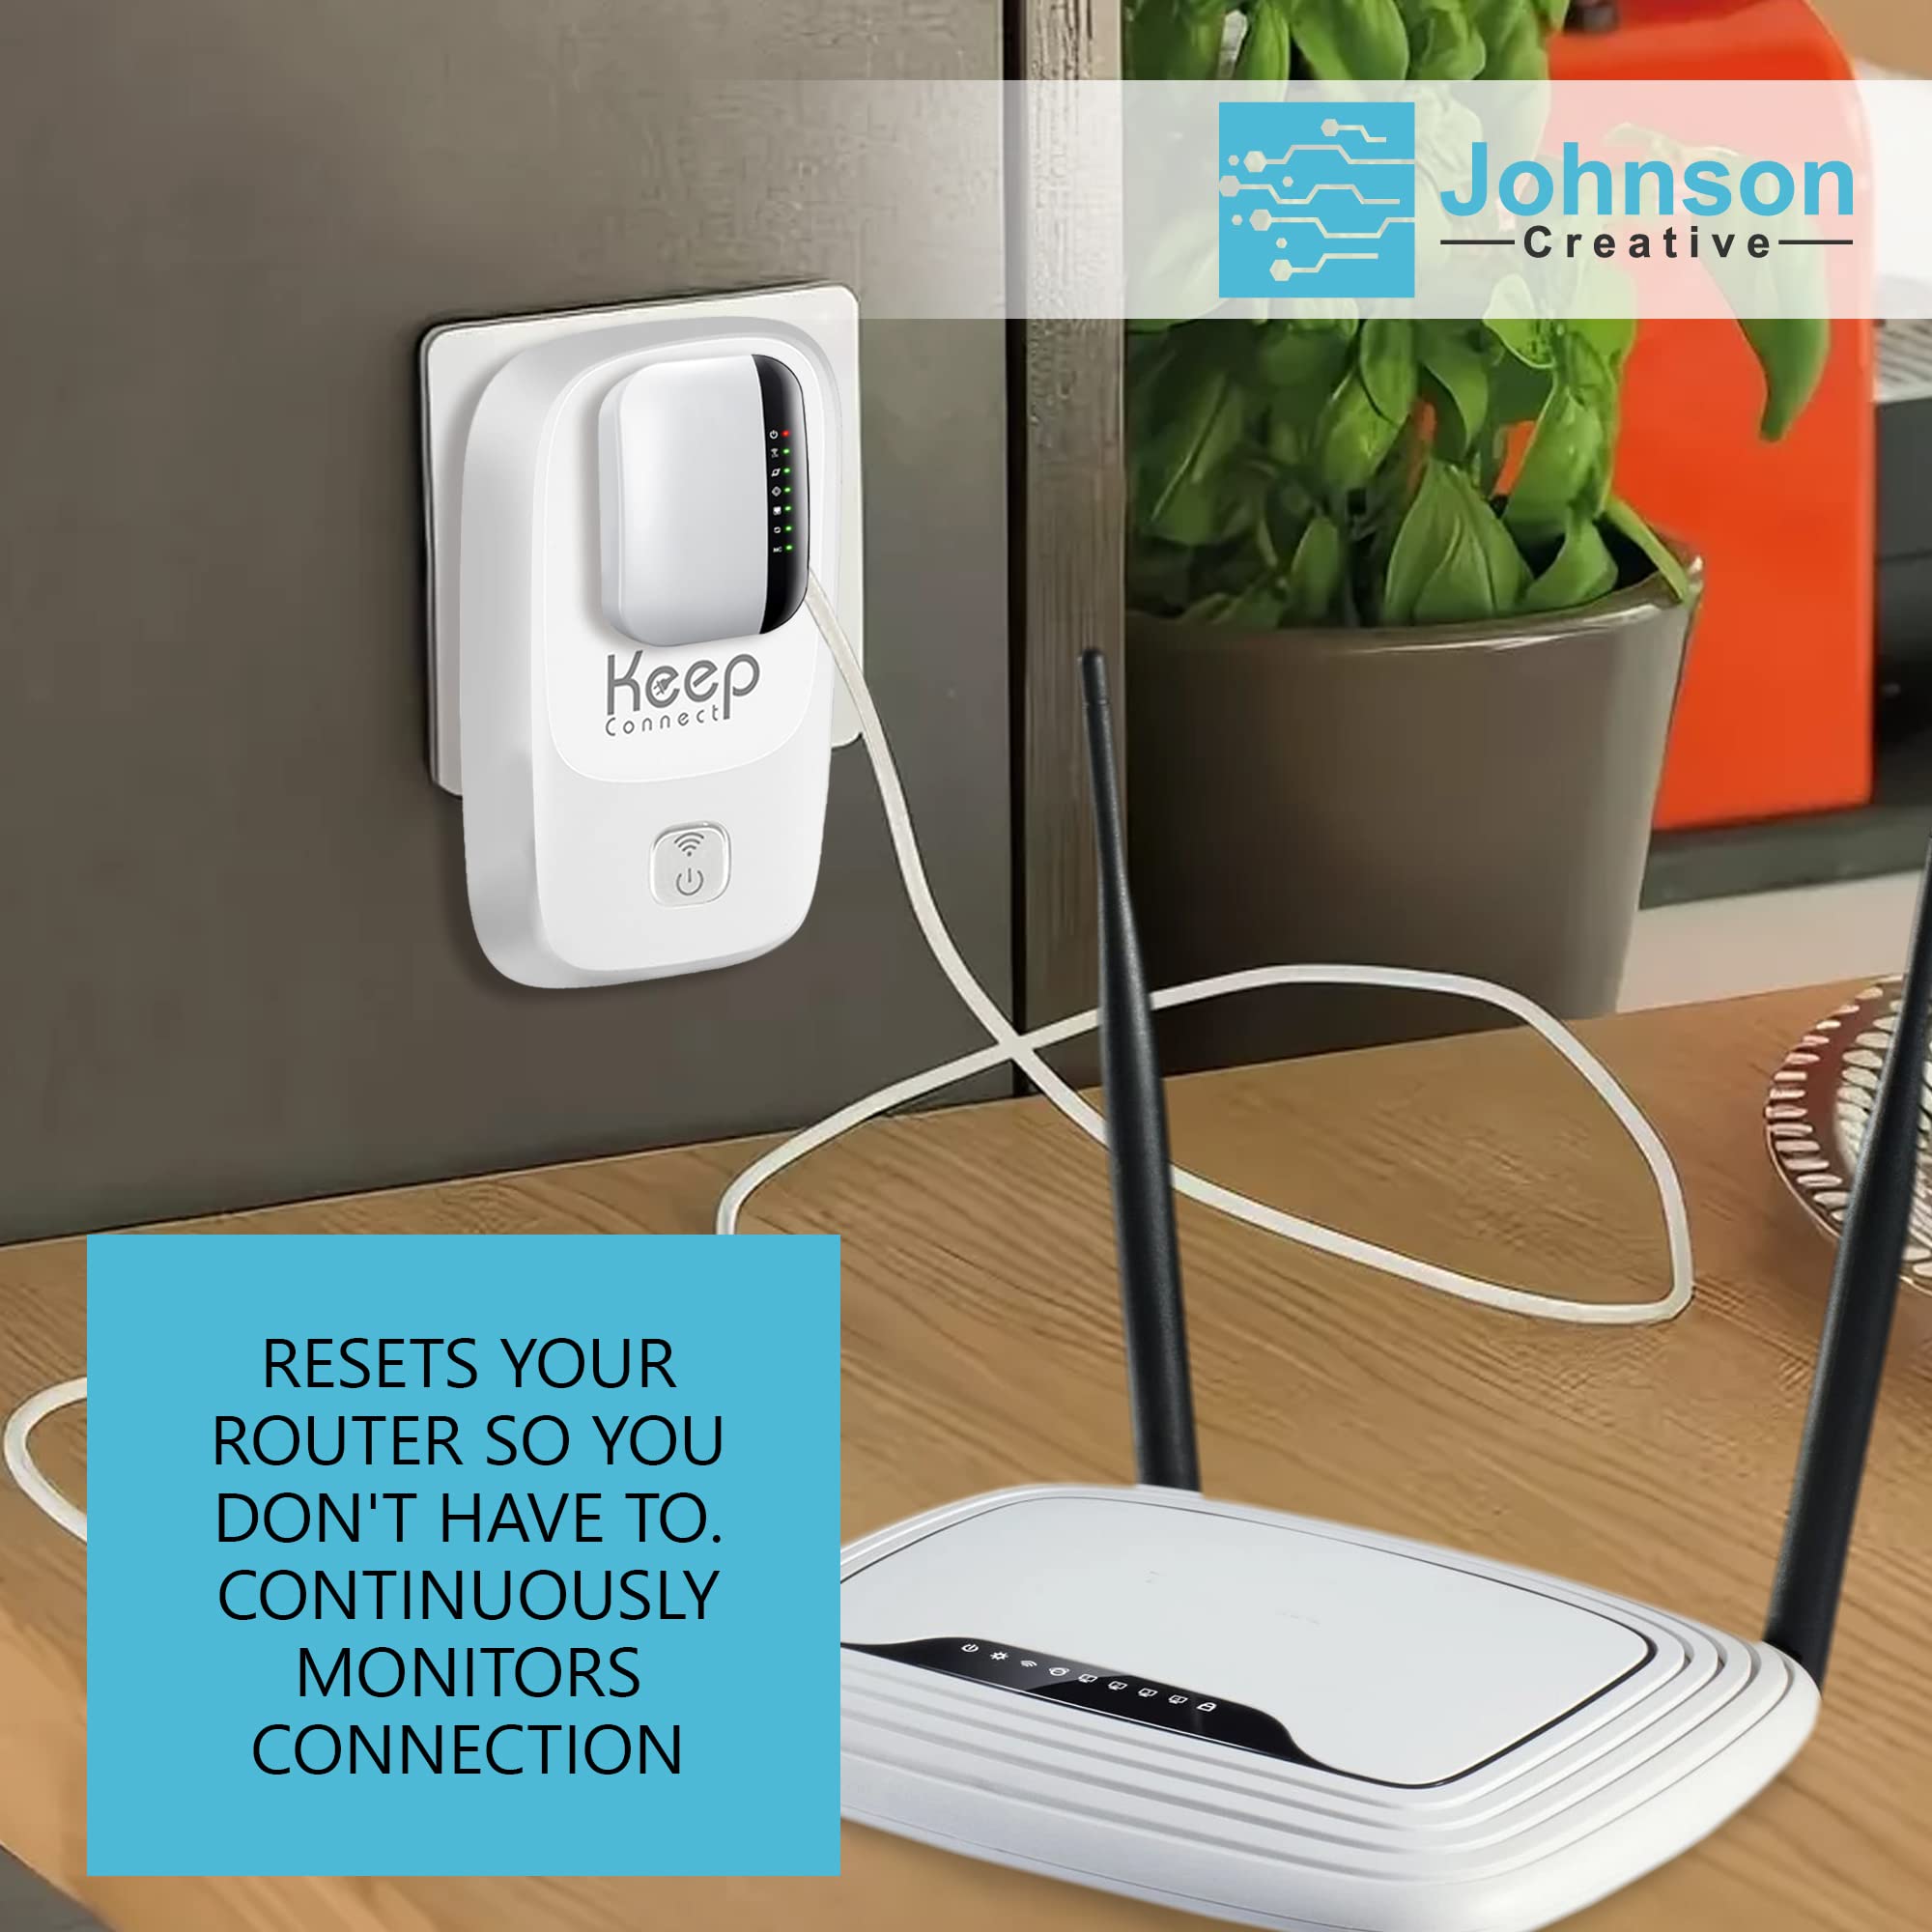 Make sure you are connected to a stable internet connection.
Restart your modem or router.